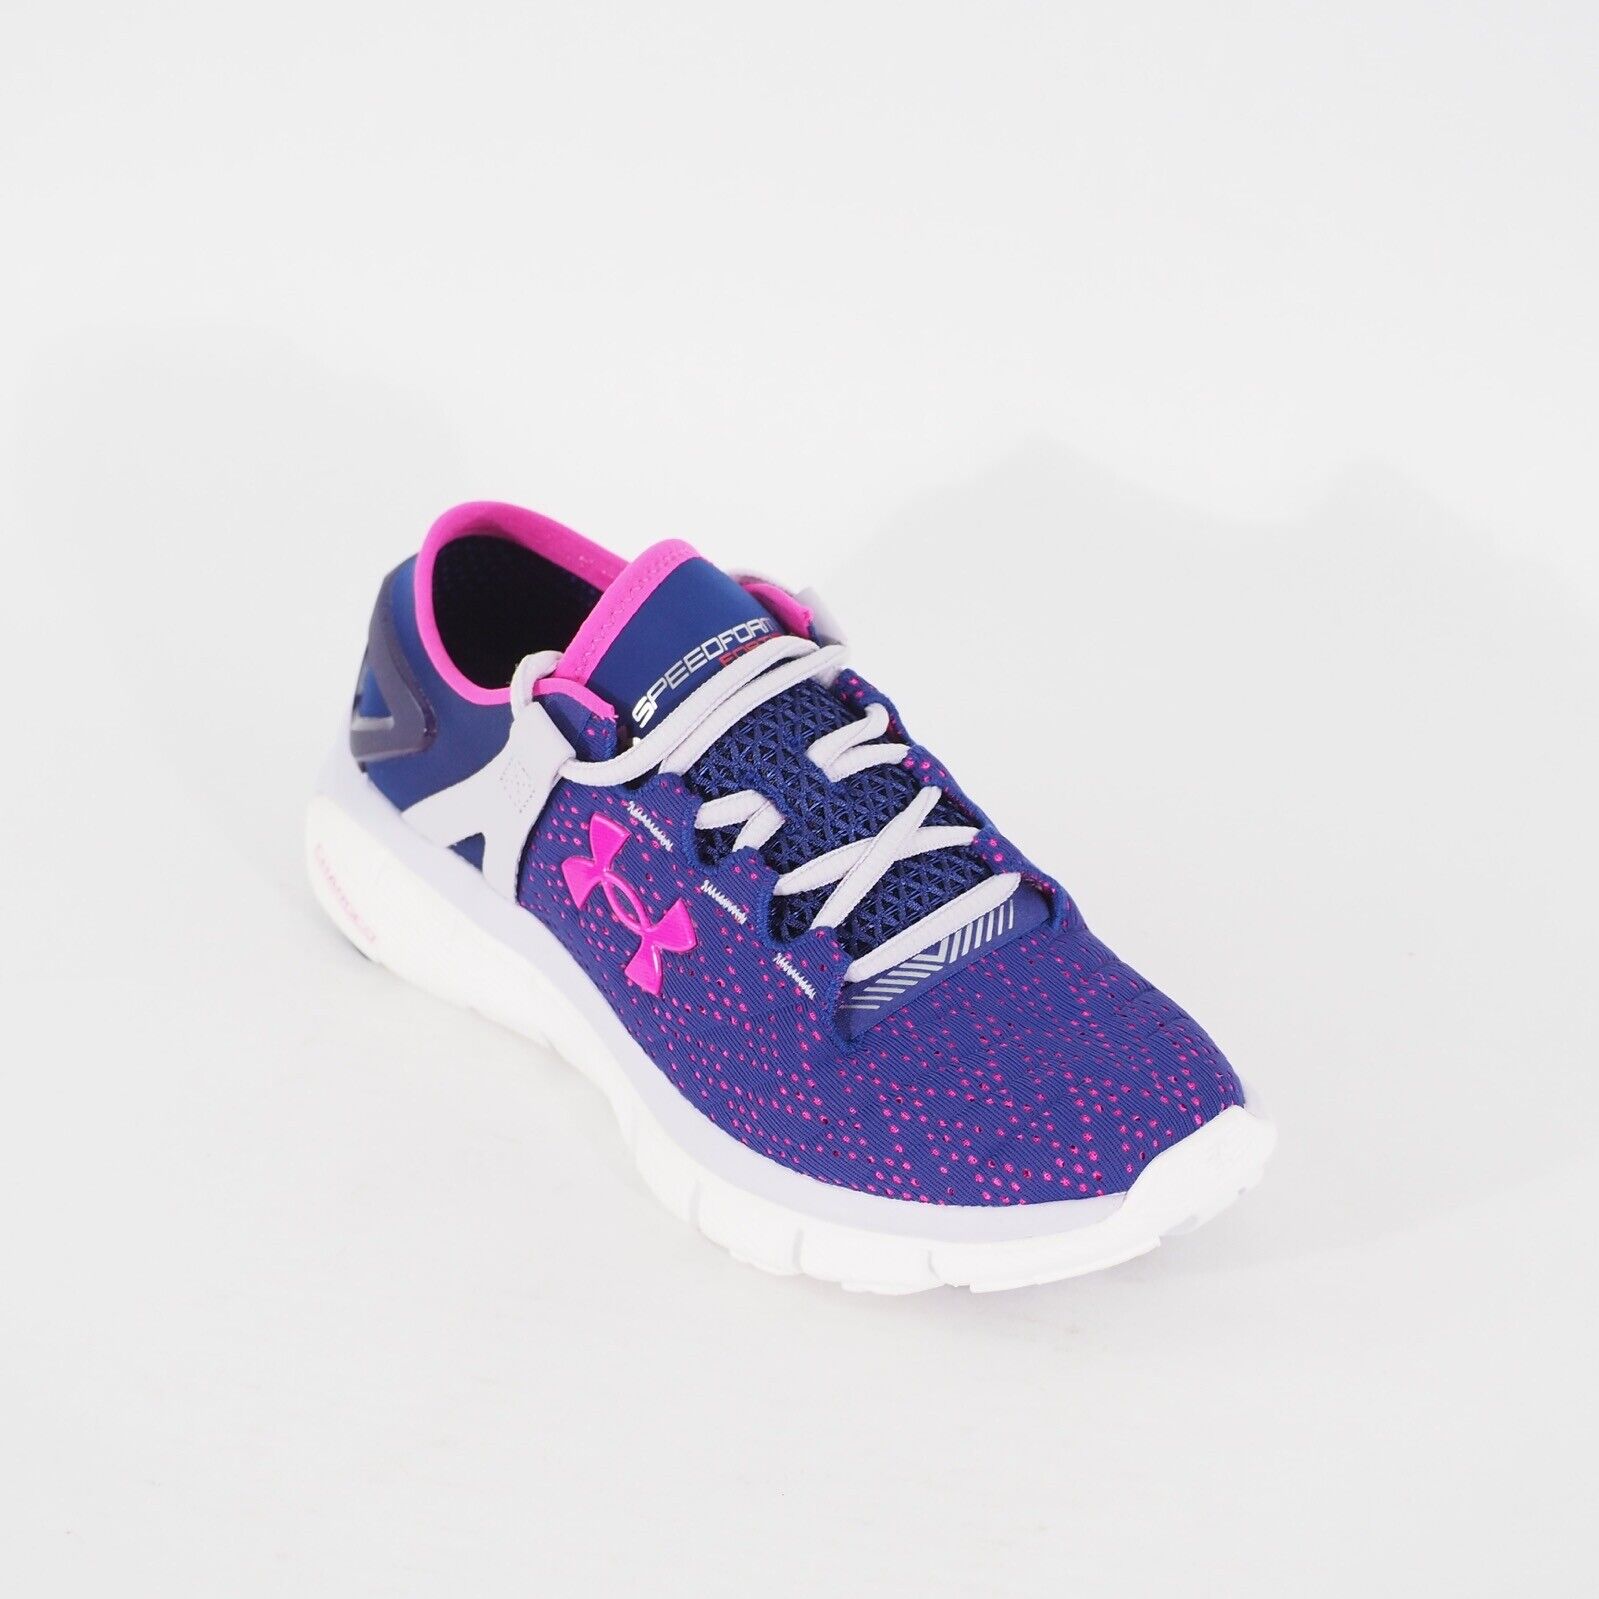 Womens Under Armour Speedform Fortis Textile Lace Up Running Walking Trainers